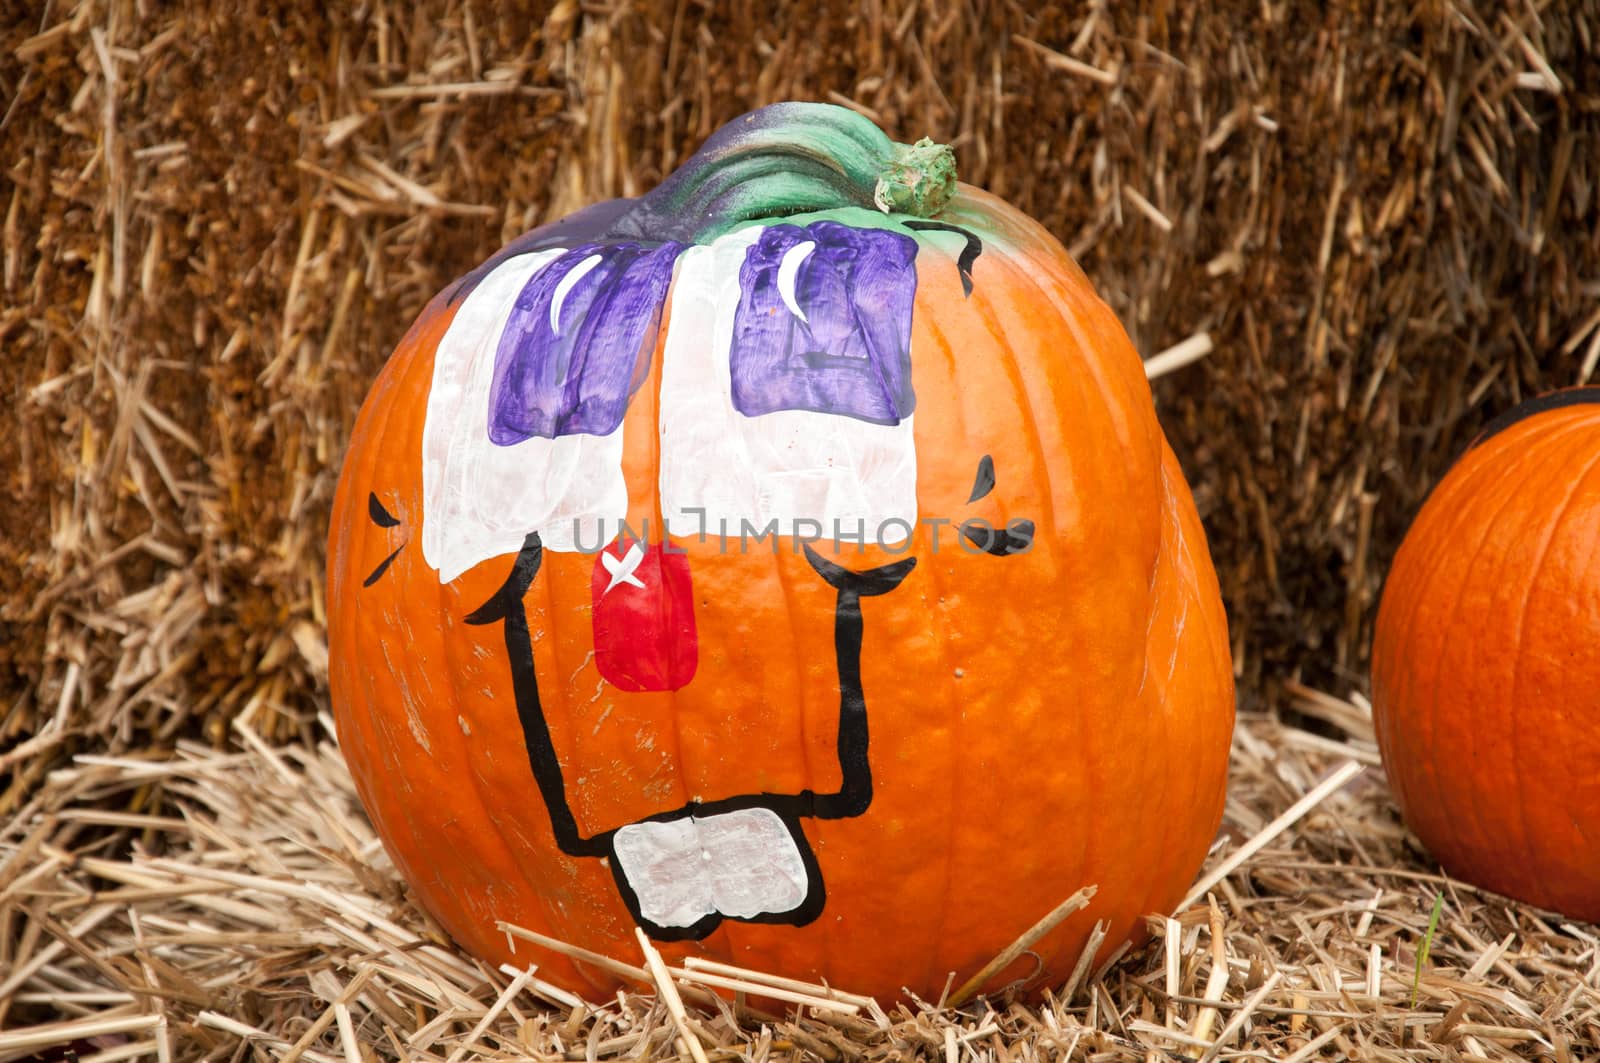 A face painted on a pumpkin